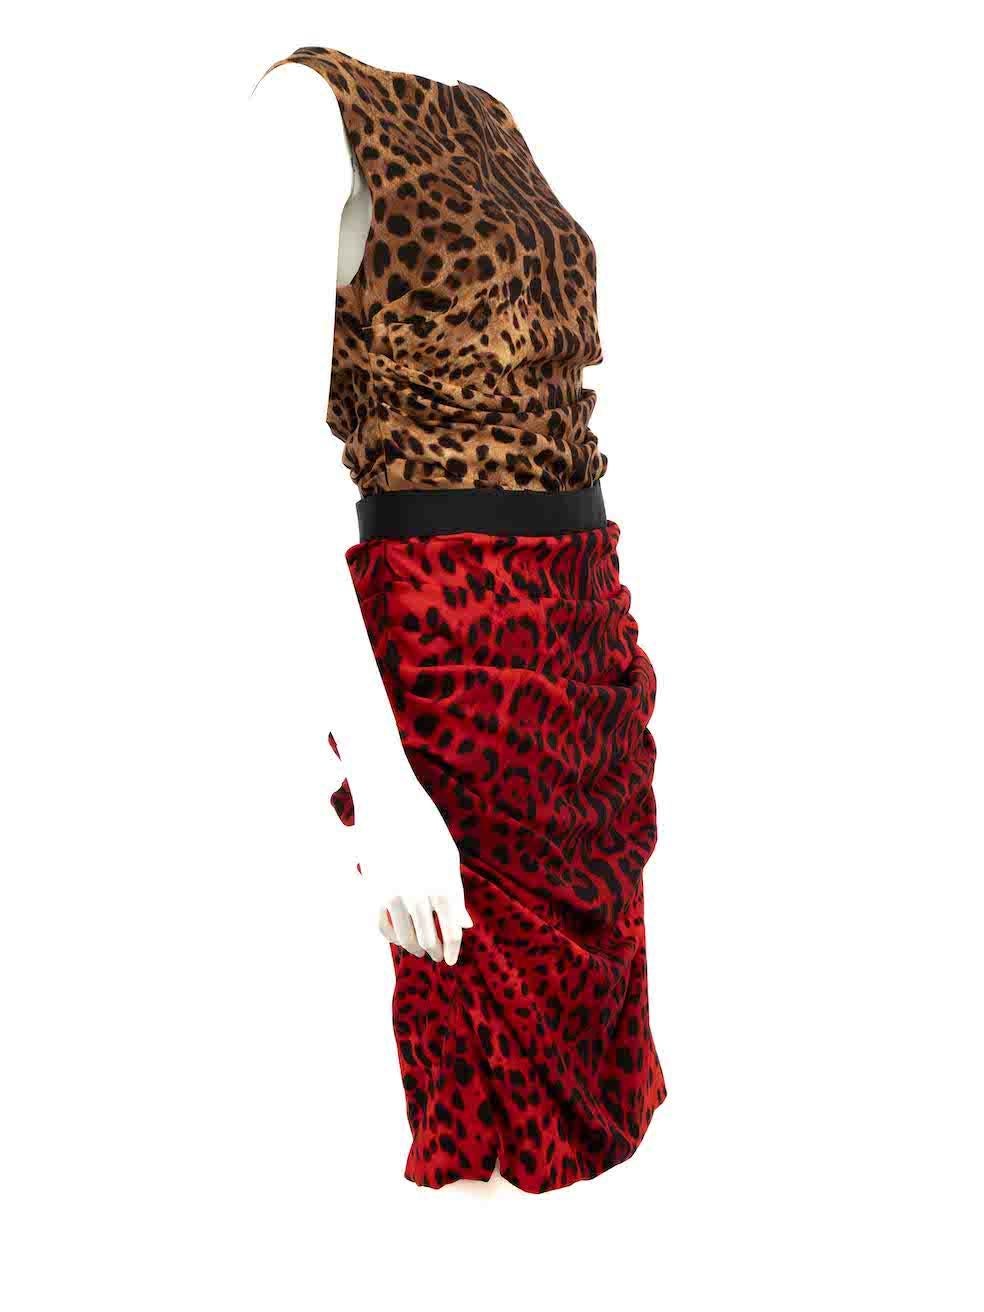 CONDITION is Good. General wear to dress is evident. Moderate pulls to fabric over all dress particularly the front on this used Dolce & Gabbana designer resale item.
 
 
 
 Details
 
 
 Two toned- red and brown
 
 Silk
 
 Bodycon dress
 
 Leopard